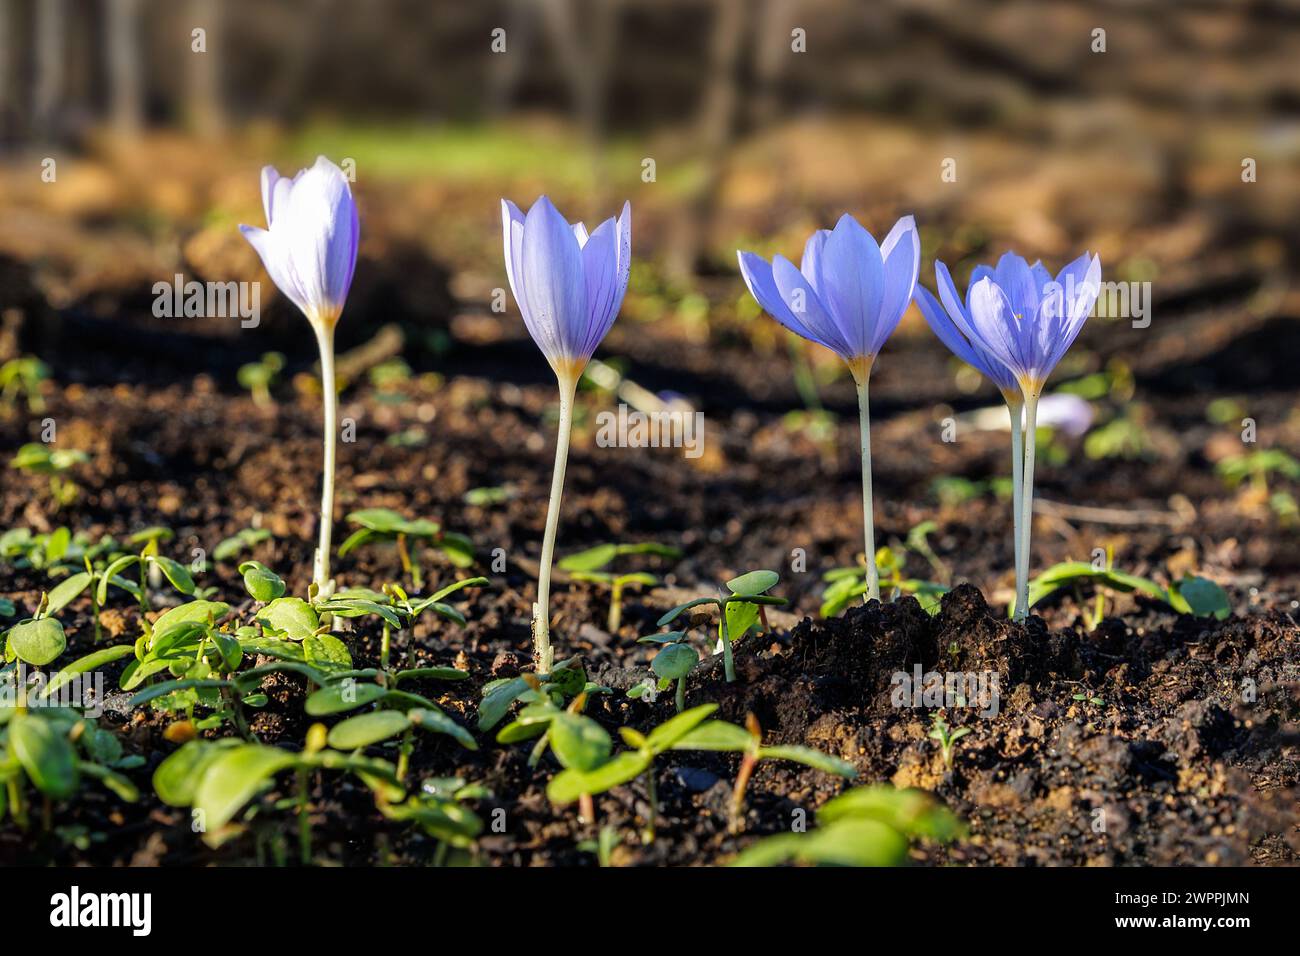 Crocus pulchellus or hairy crocus early spring purple flower bouquet in the forest Stock Photo